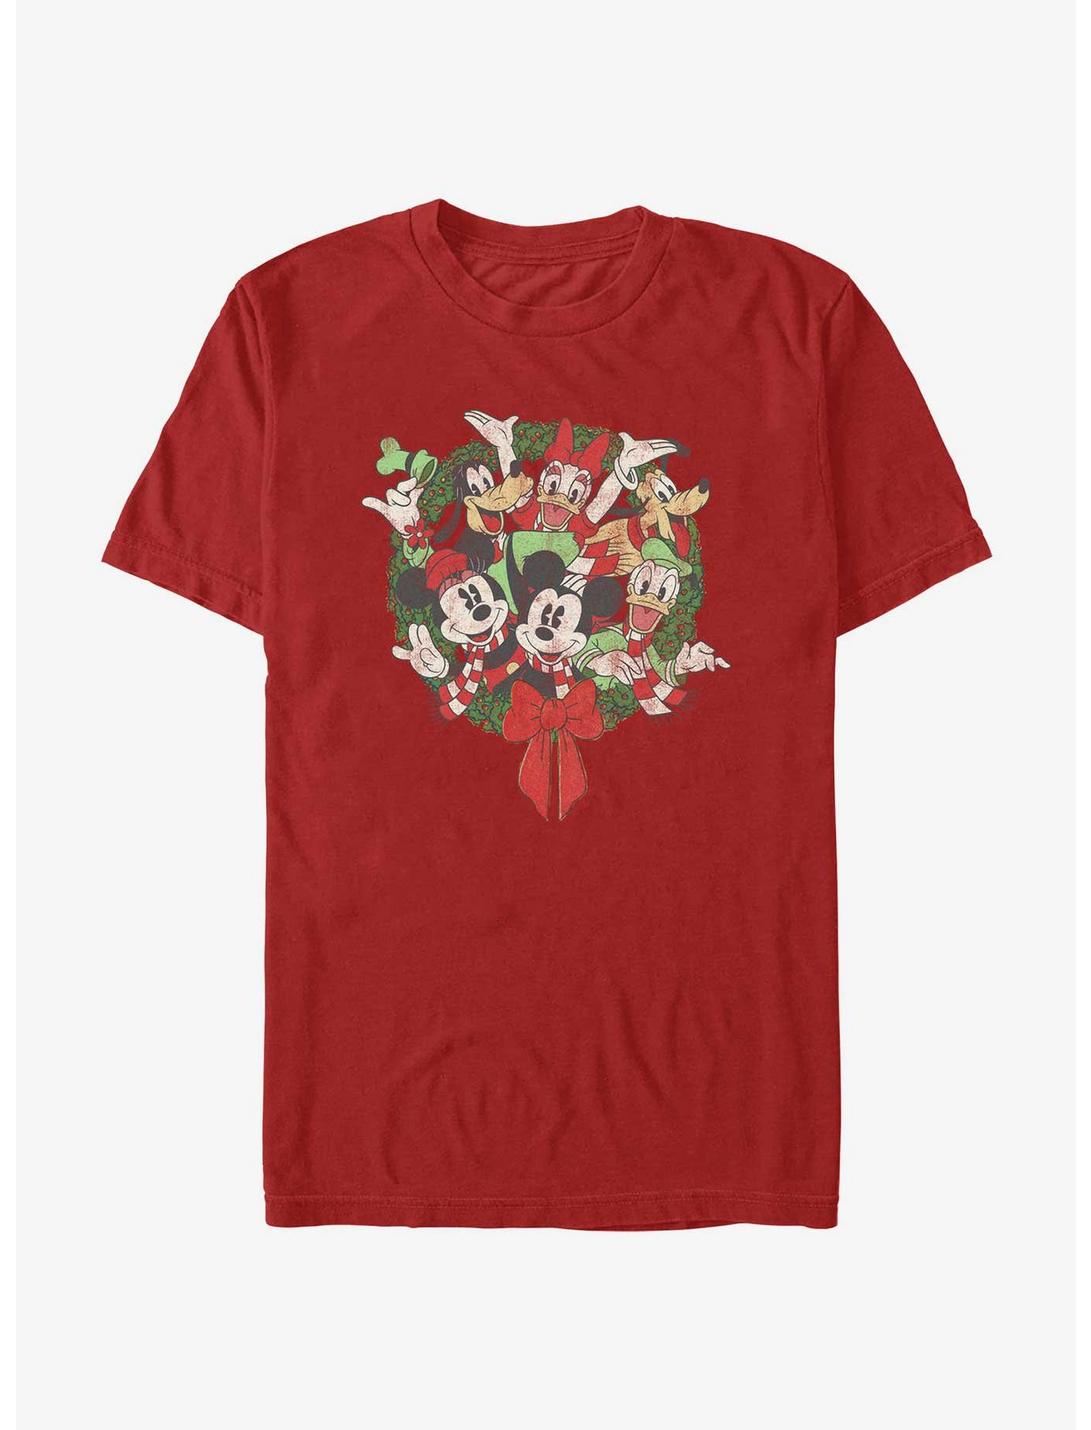 Disney Mickey Mouse Mickey & Friends Christmas Wreath T-Shirt, RED, hi-res